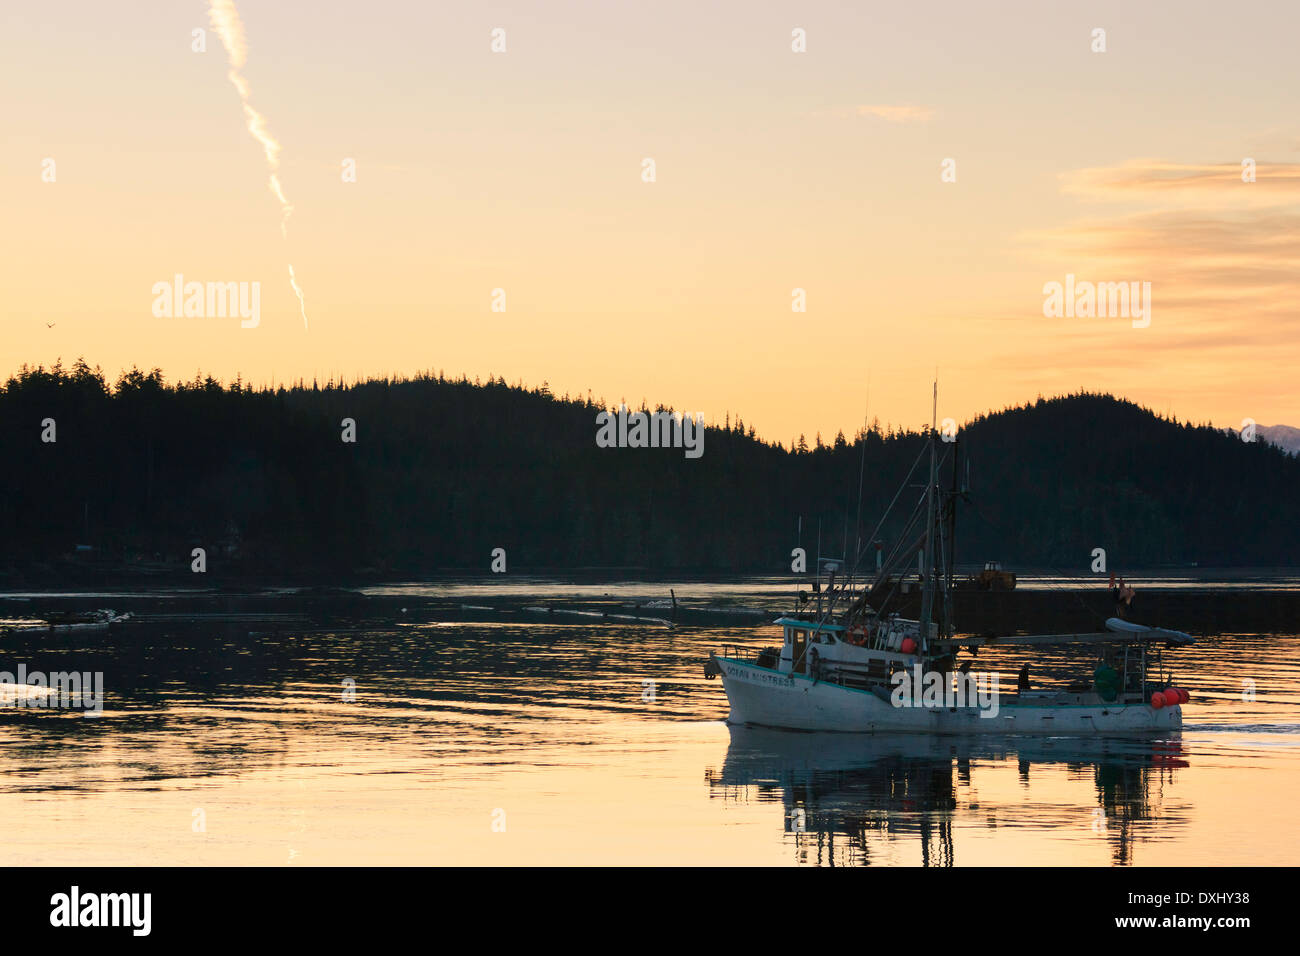 A fishing boat departs at sunrise in the calm waters of Hardy Bay, British Columbia. Stock Photo